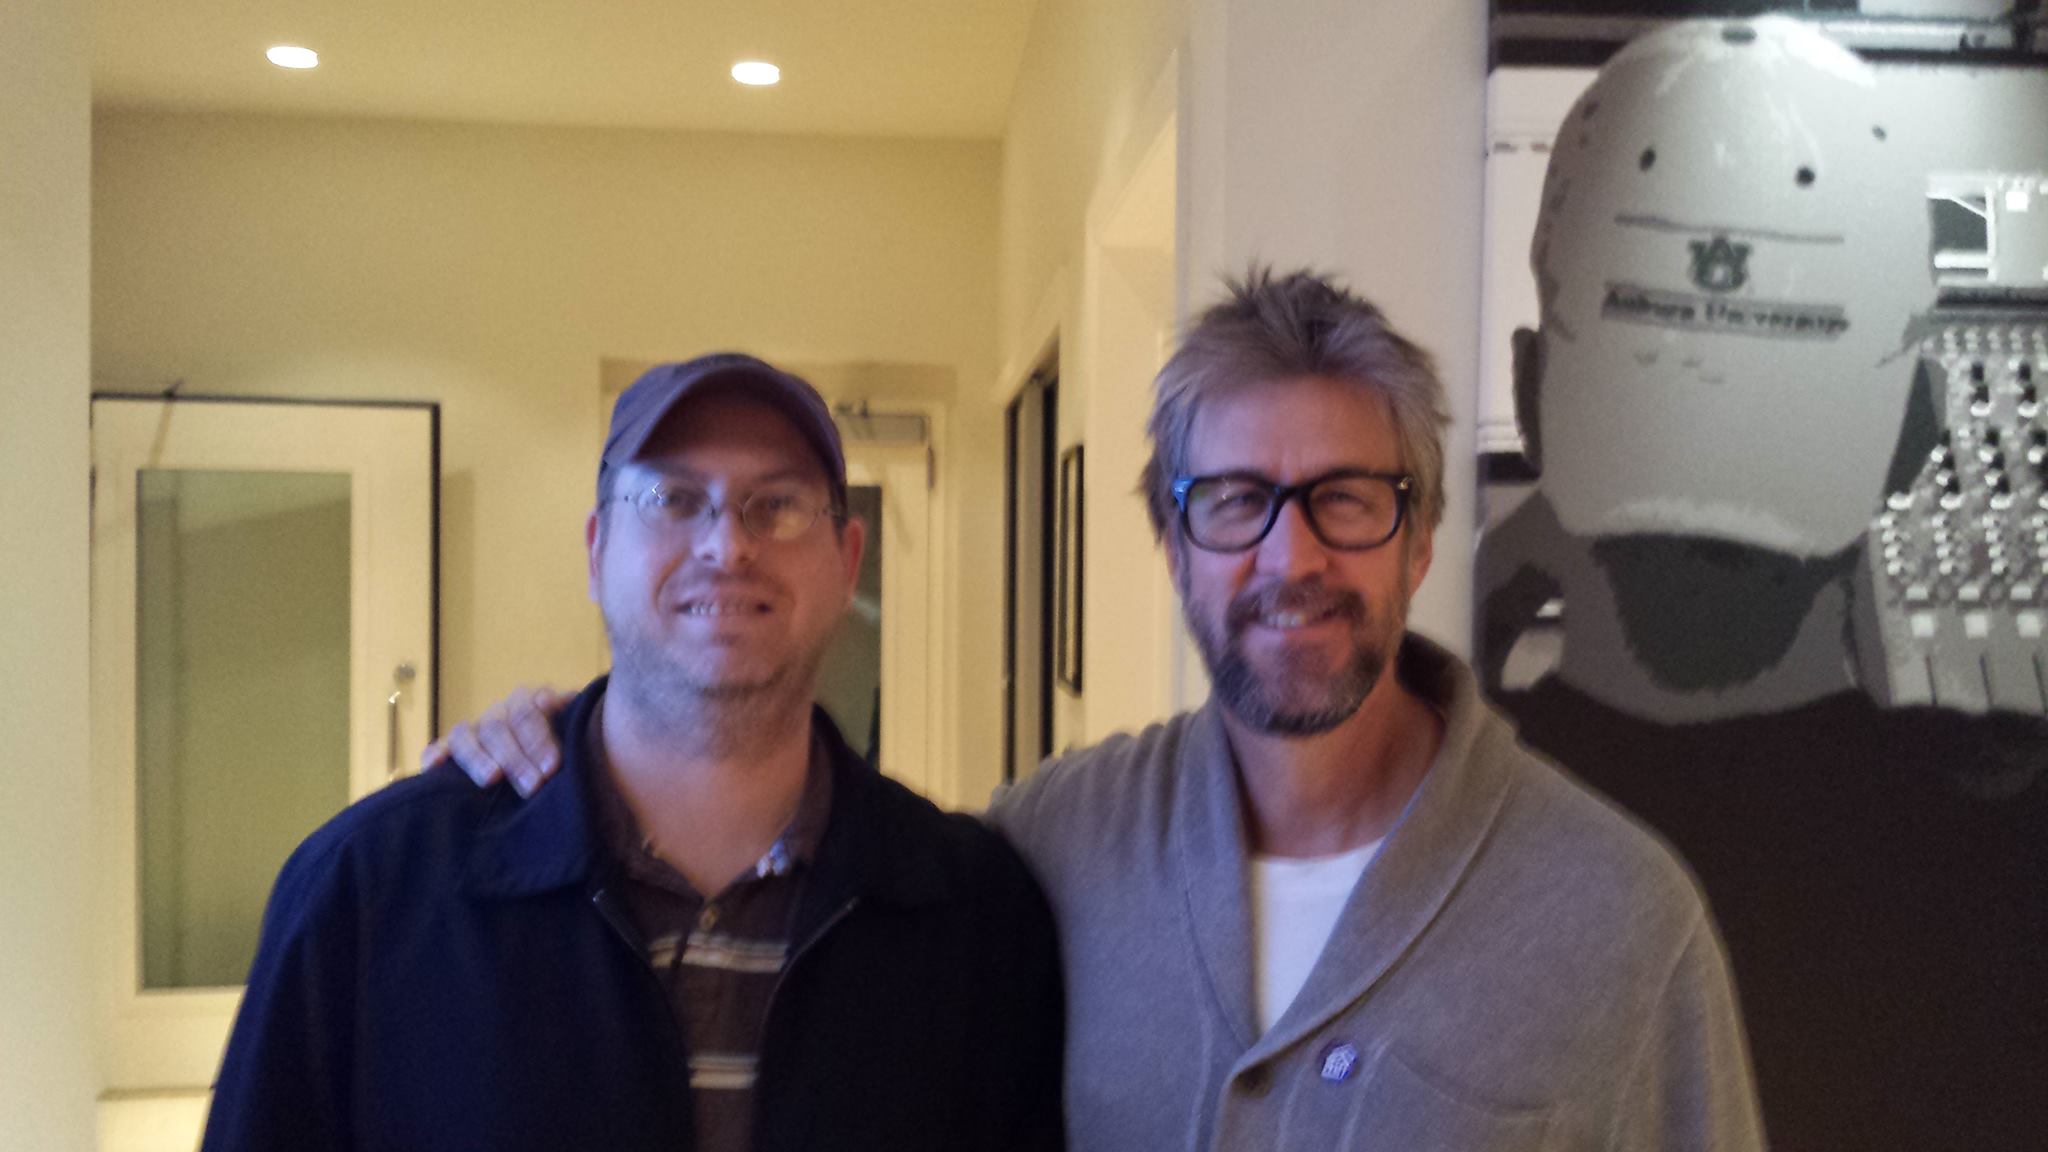 Doing a little TV Voice Over with Alan Ruck!